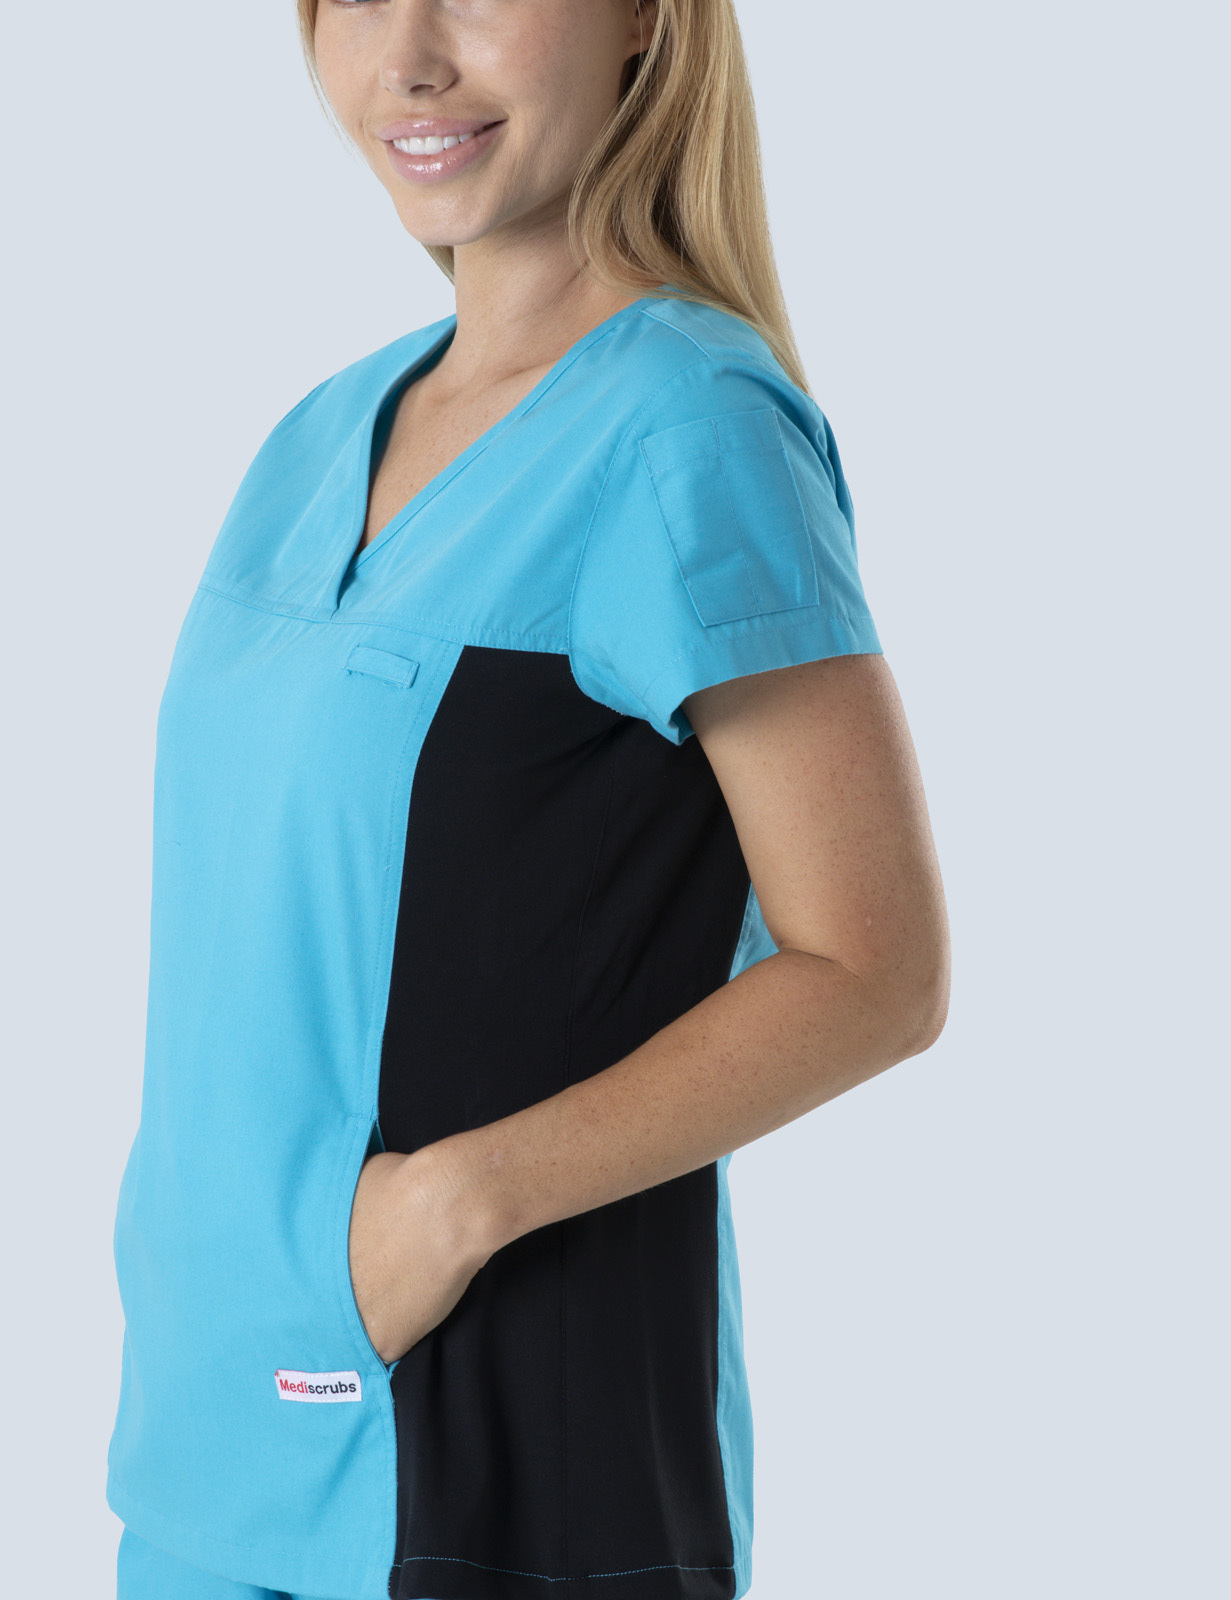 Women's Fit Solid Scrub Top With Spandex Panel - Aqua - 4X large - 2